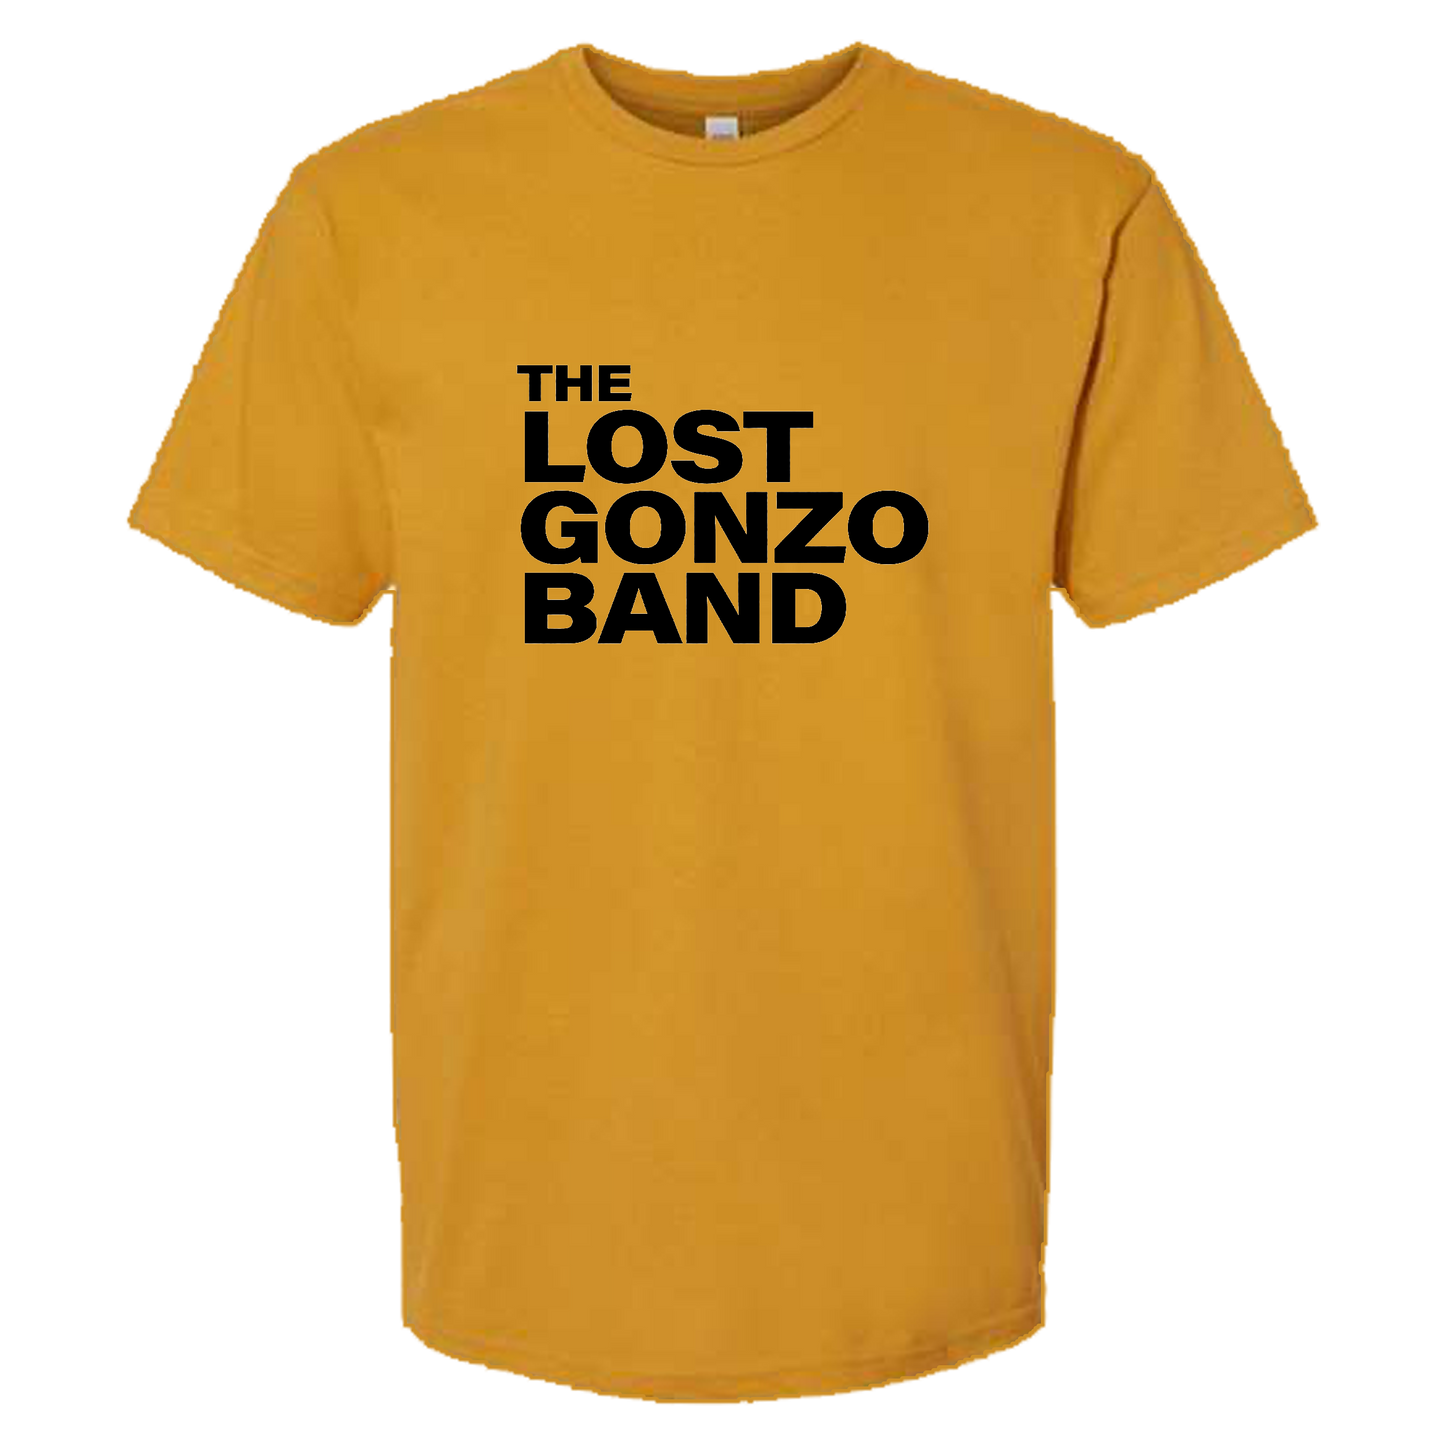 The Lost Gonzo Band Tee